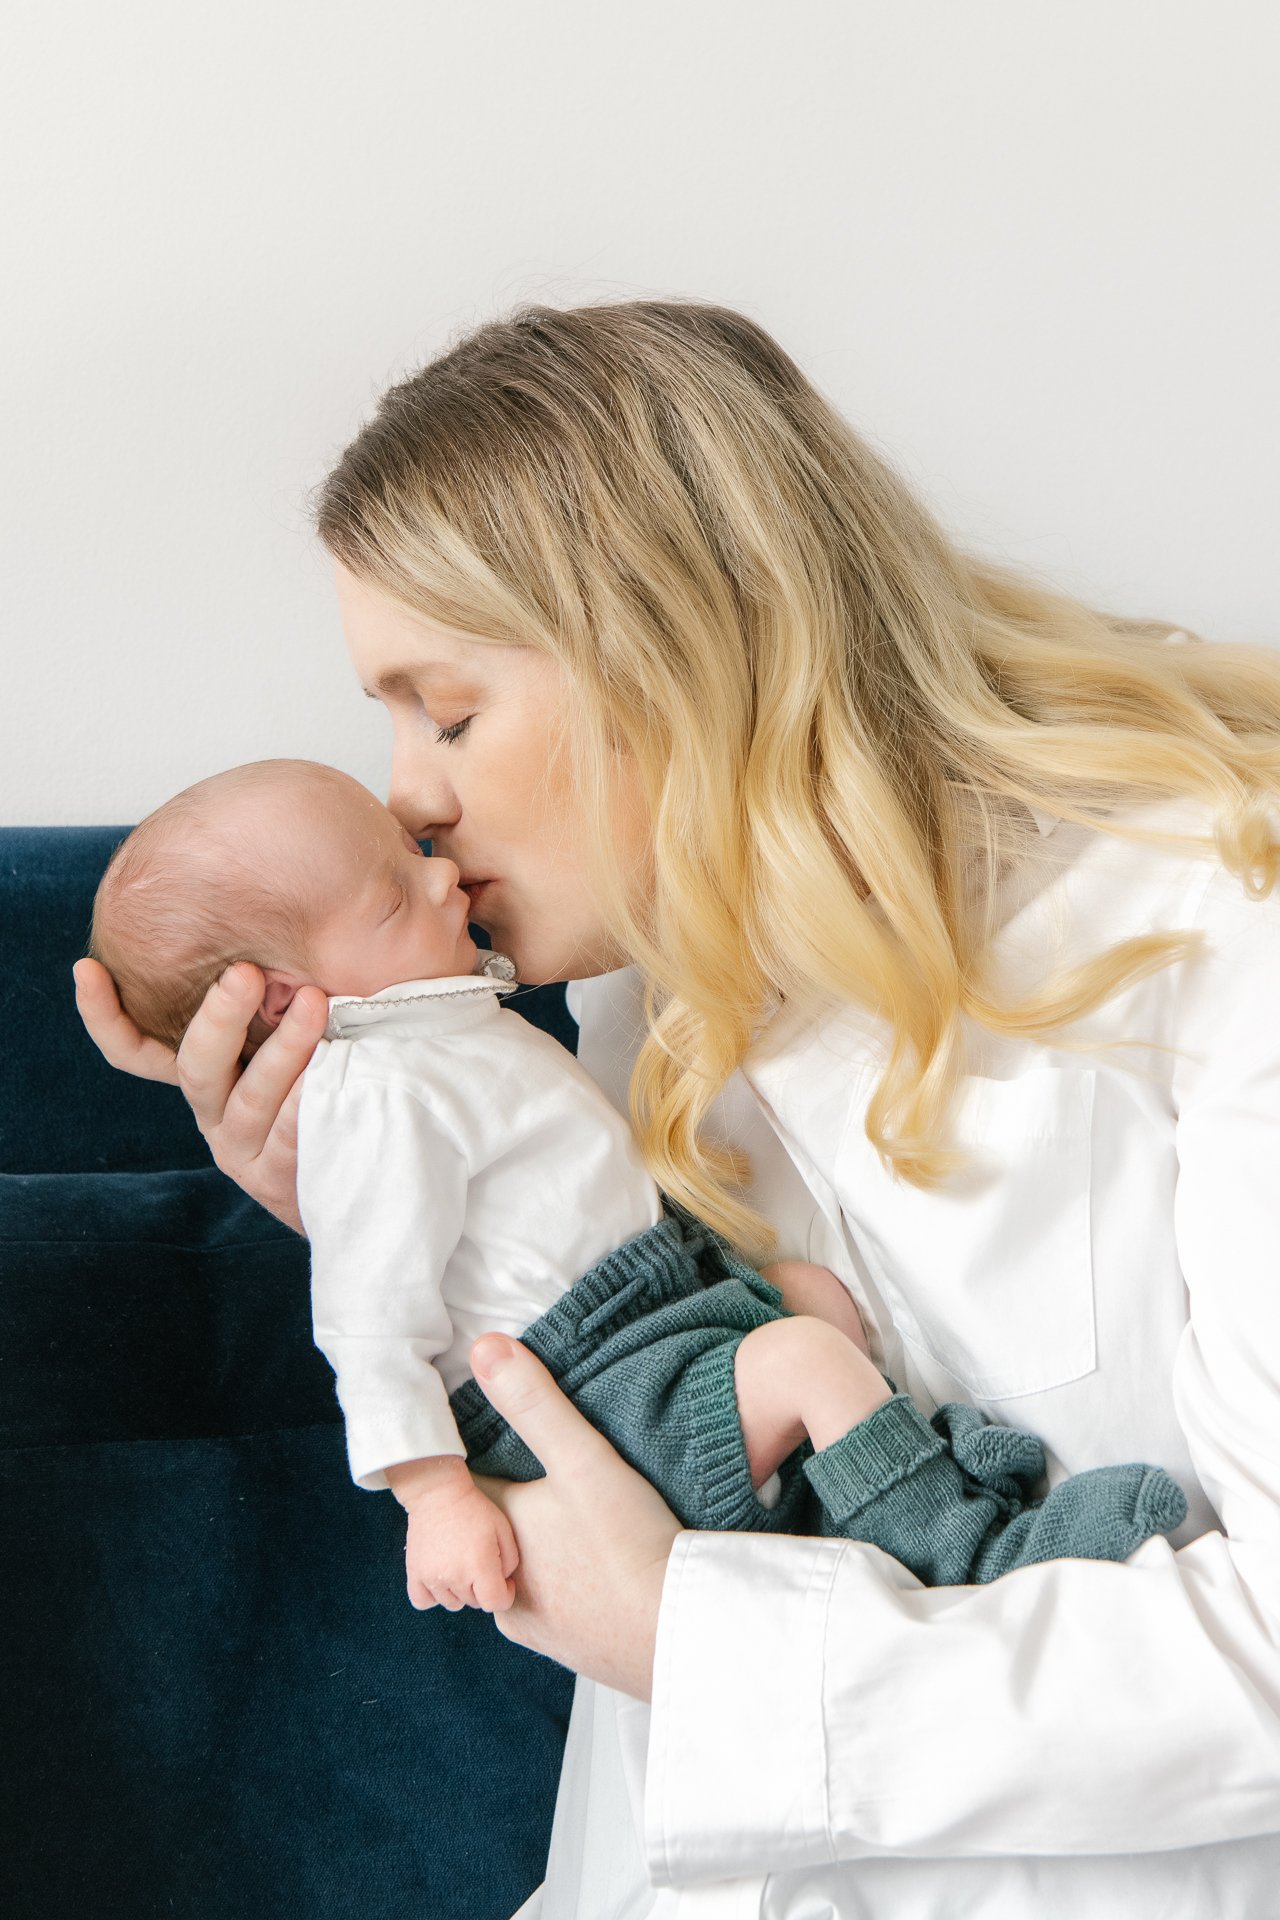  The cutest mom holds one of her newborn babies close as she tenderly places a kiss on the baby’s forehead. Mom dresses in neutral colors to create a timeless image with her baby. Nicole Hawkins photography captures this sweet moment. #twinnewbornses